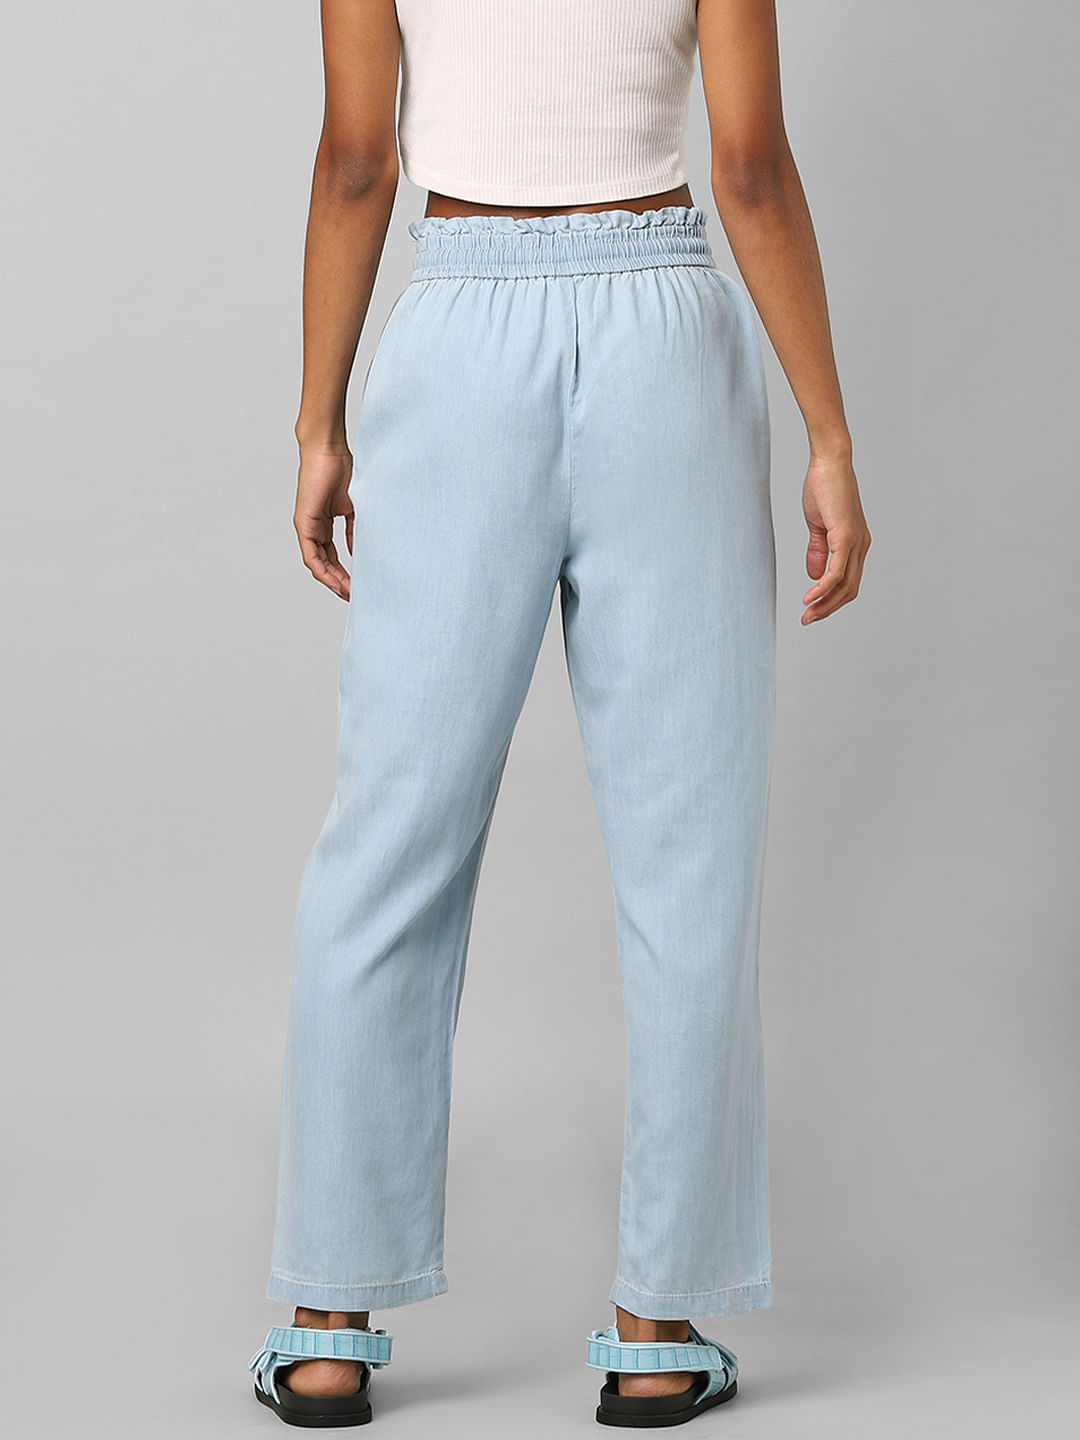 Shoppers Say the Iximo Linen Pants Are Perfect for Summer